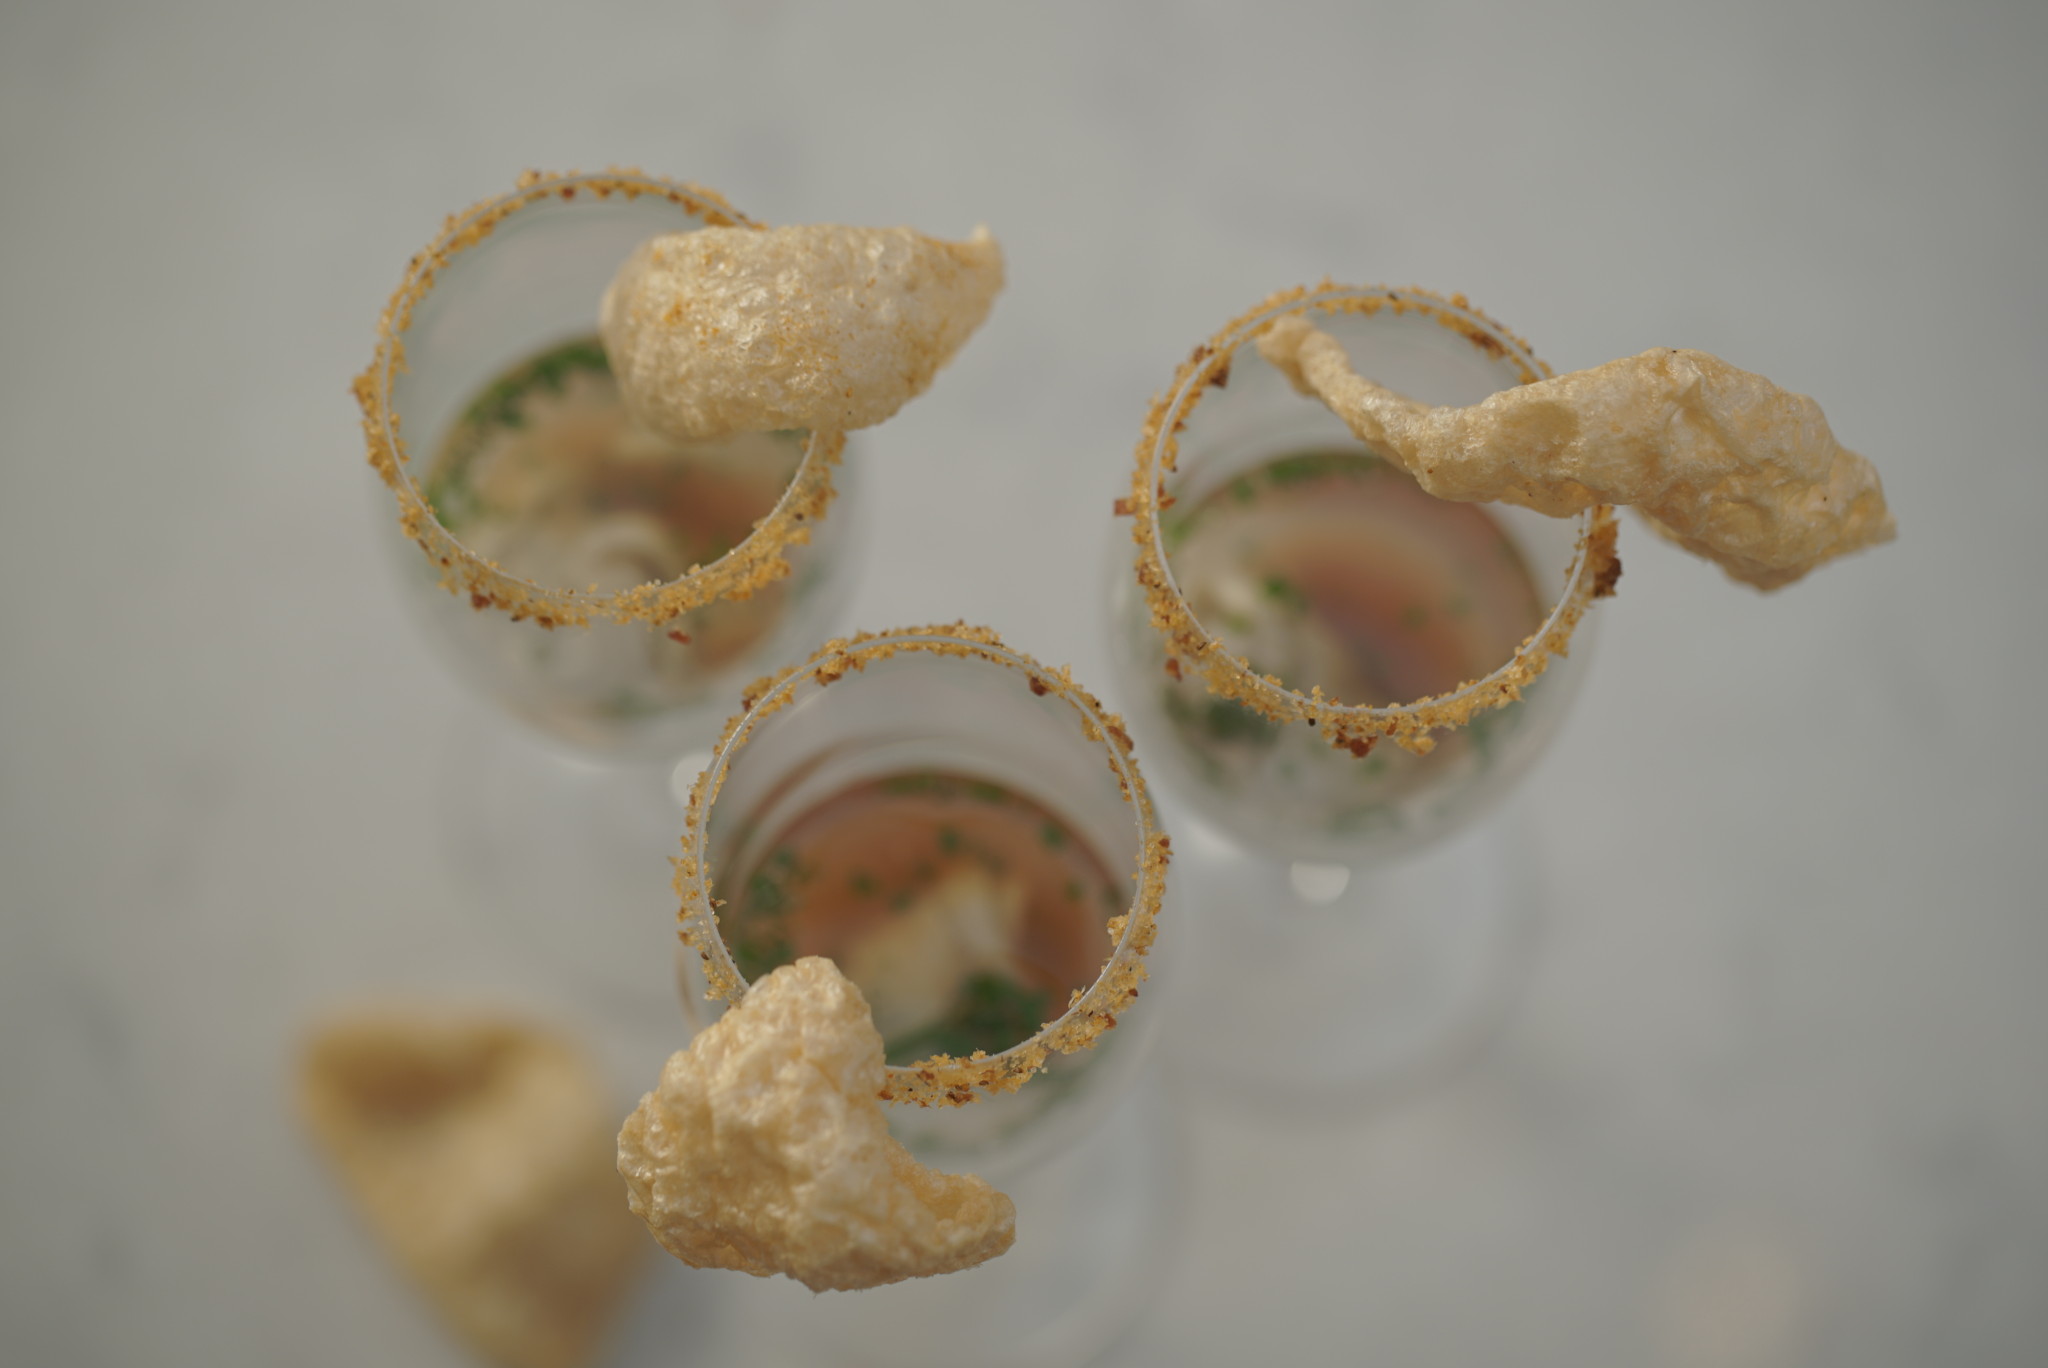 Pig Lips Oyster Shooters